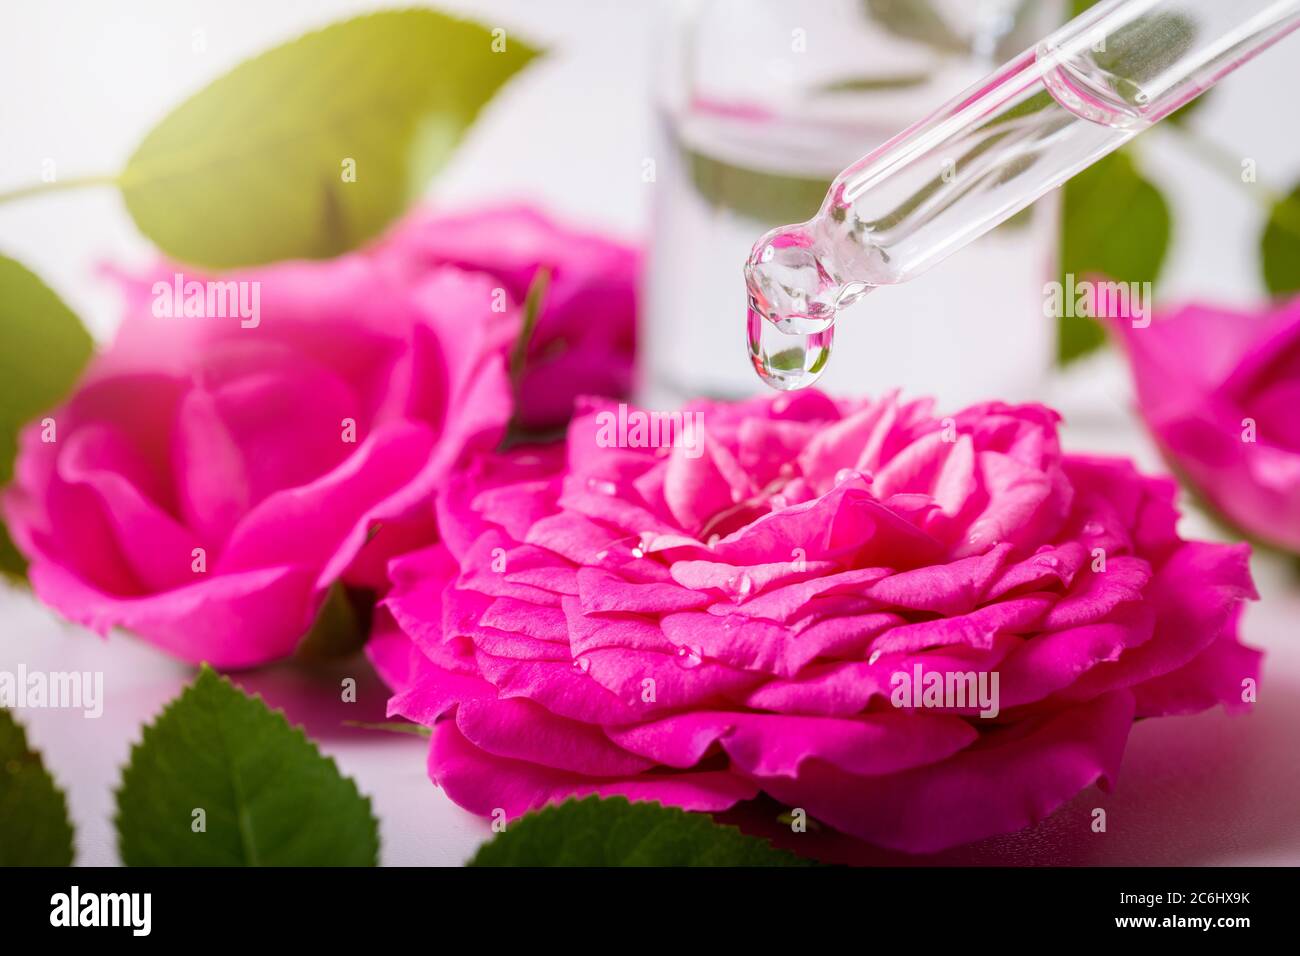 dropper with floral essential oil drop above the rose flower Stock Photo